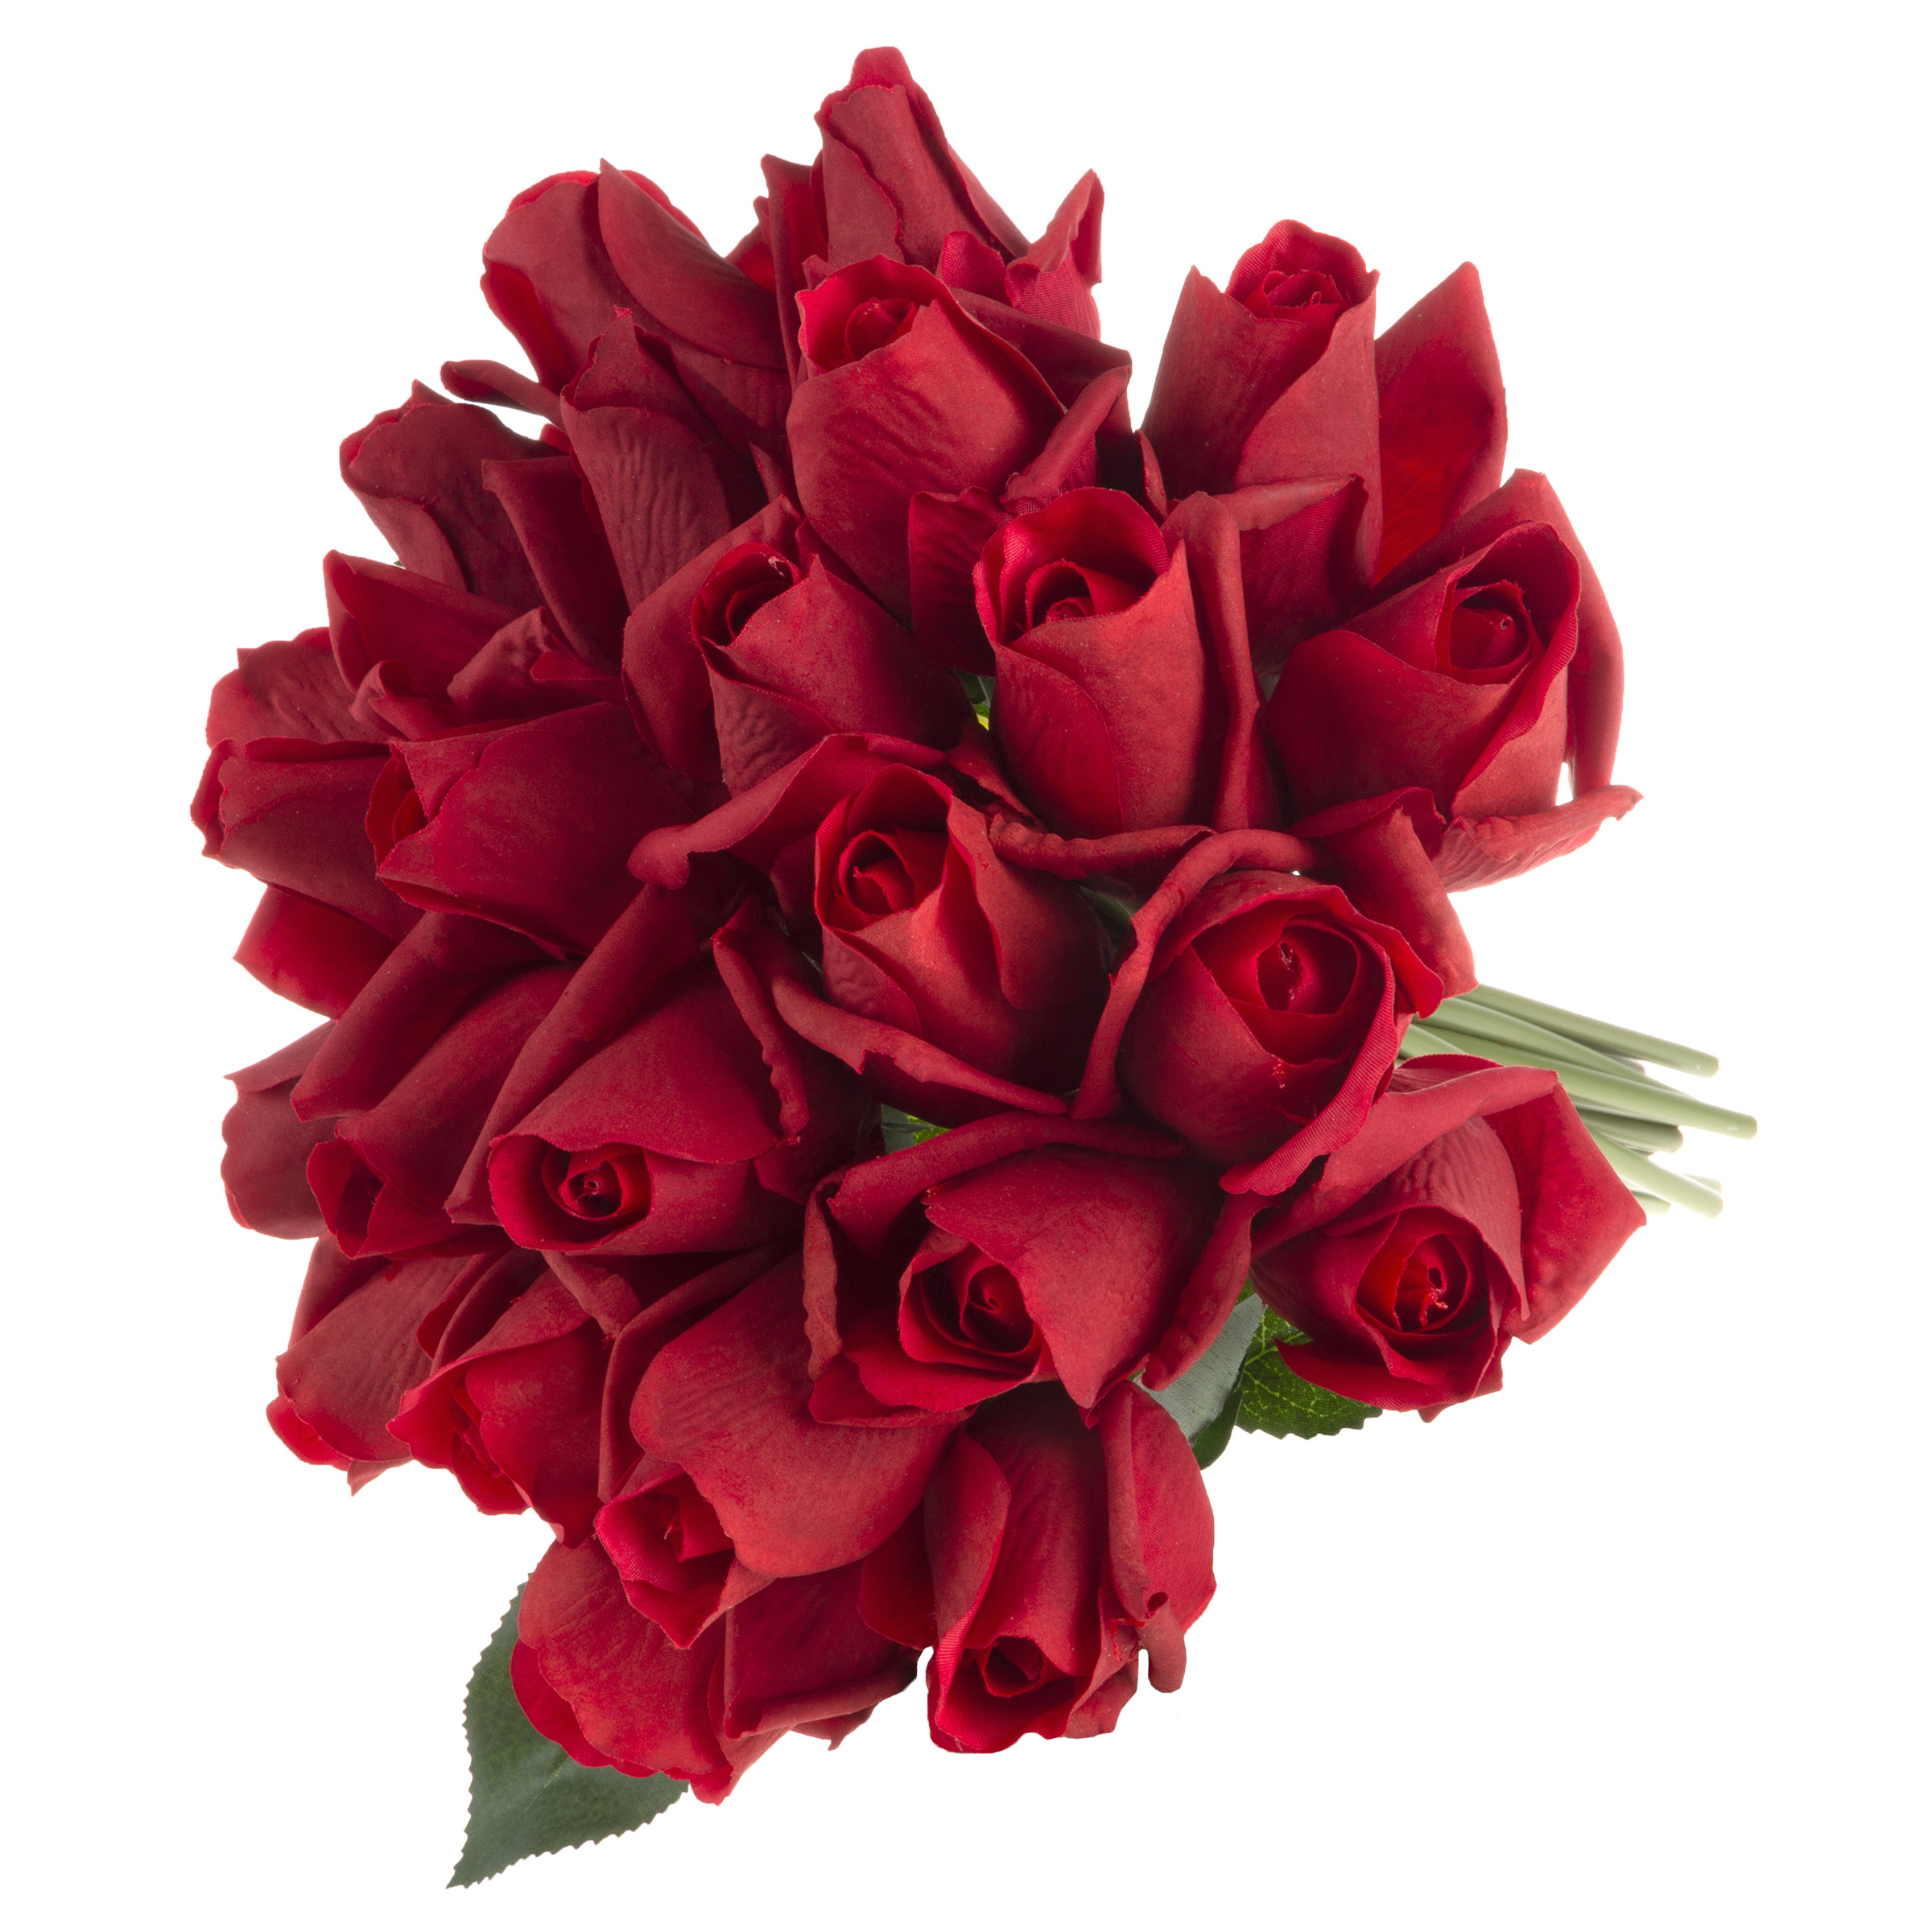 Artificial Realistic Faux Roses 24 Pack Wire Stems Real Touch Look Feel - Red